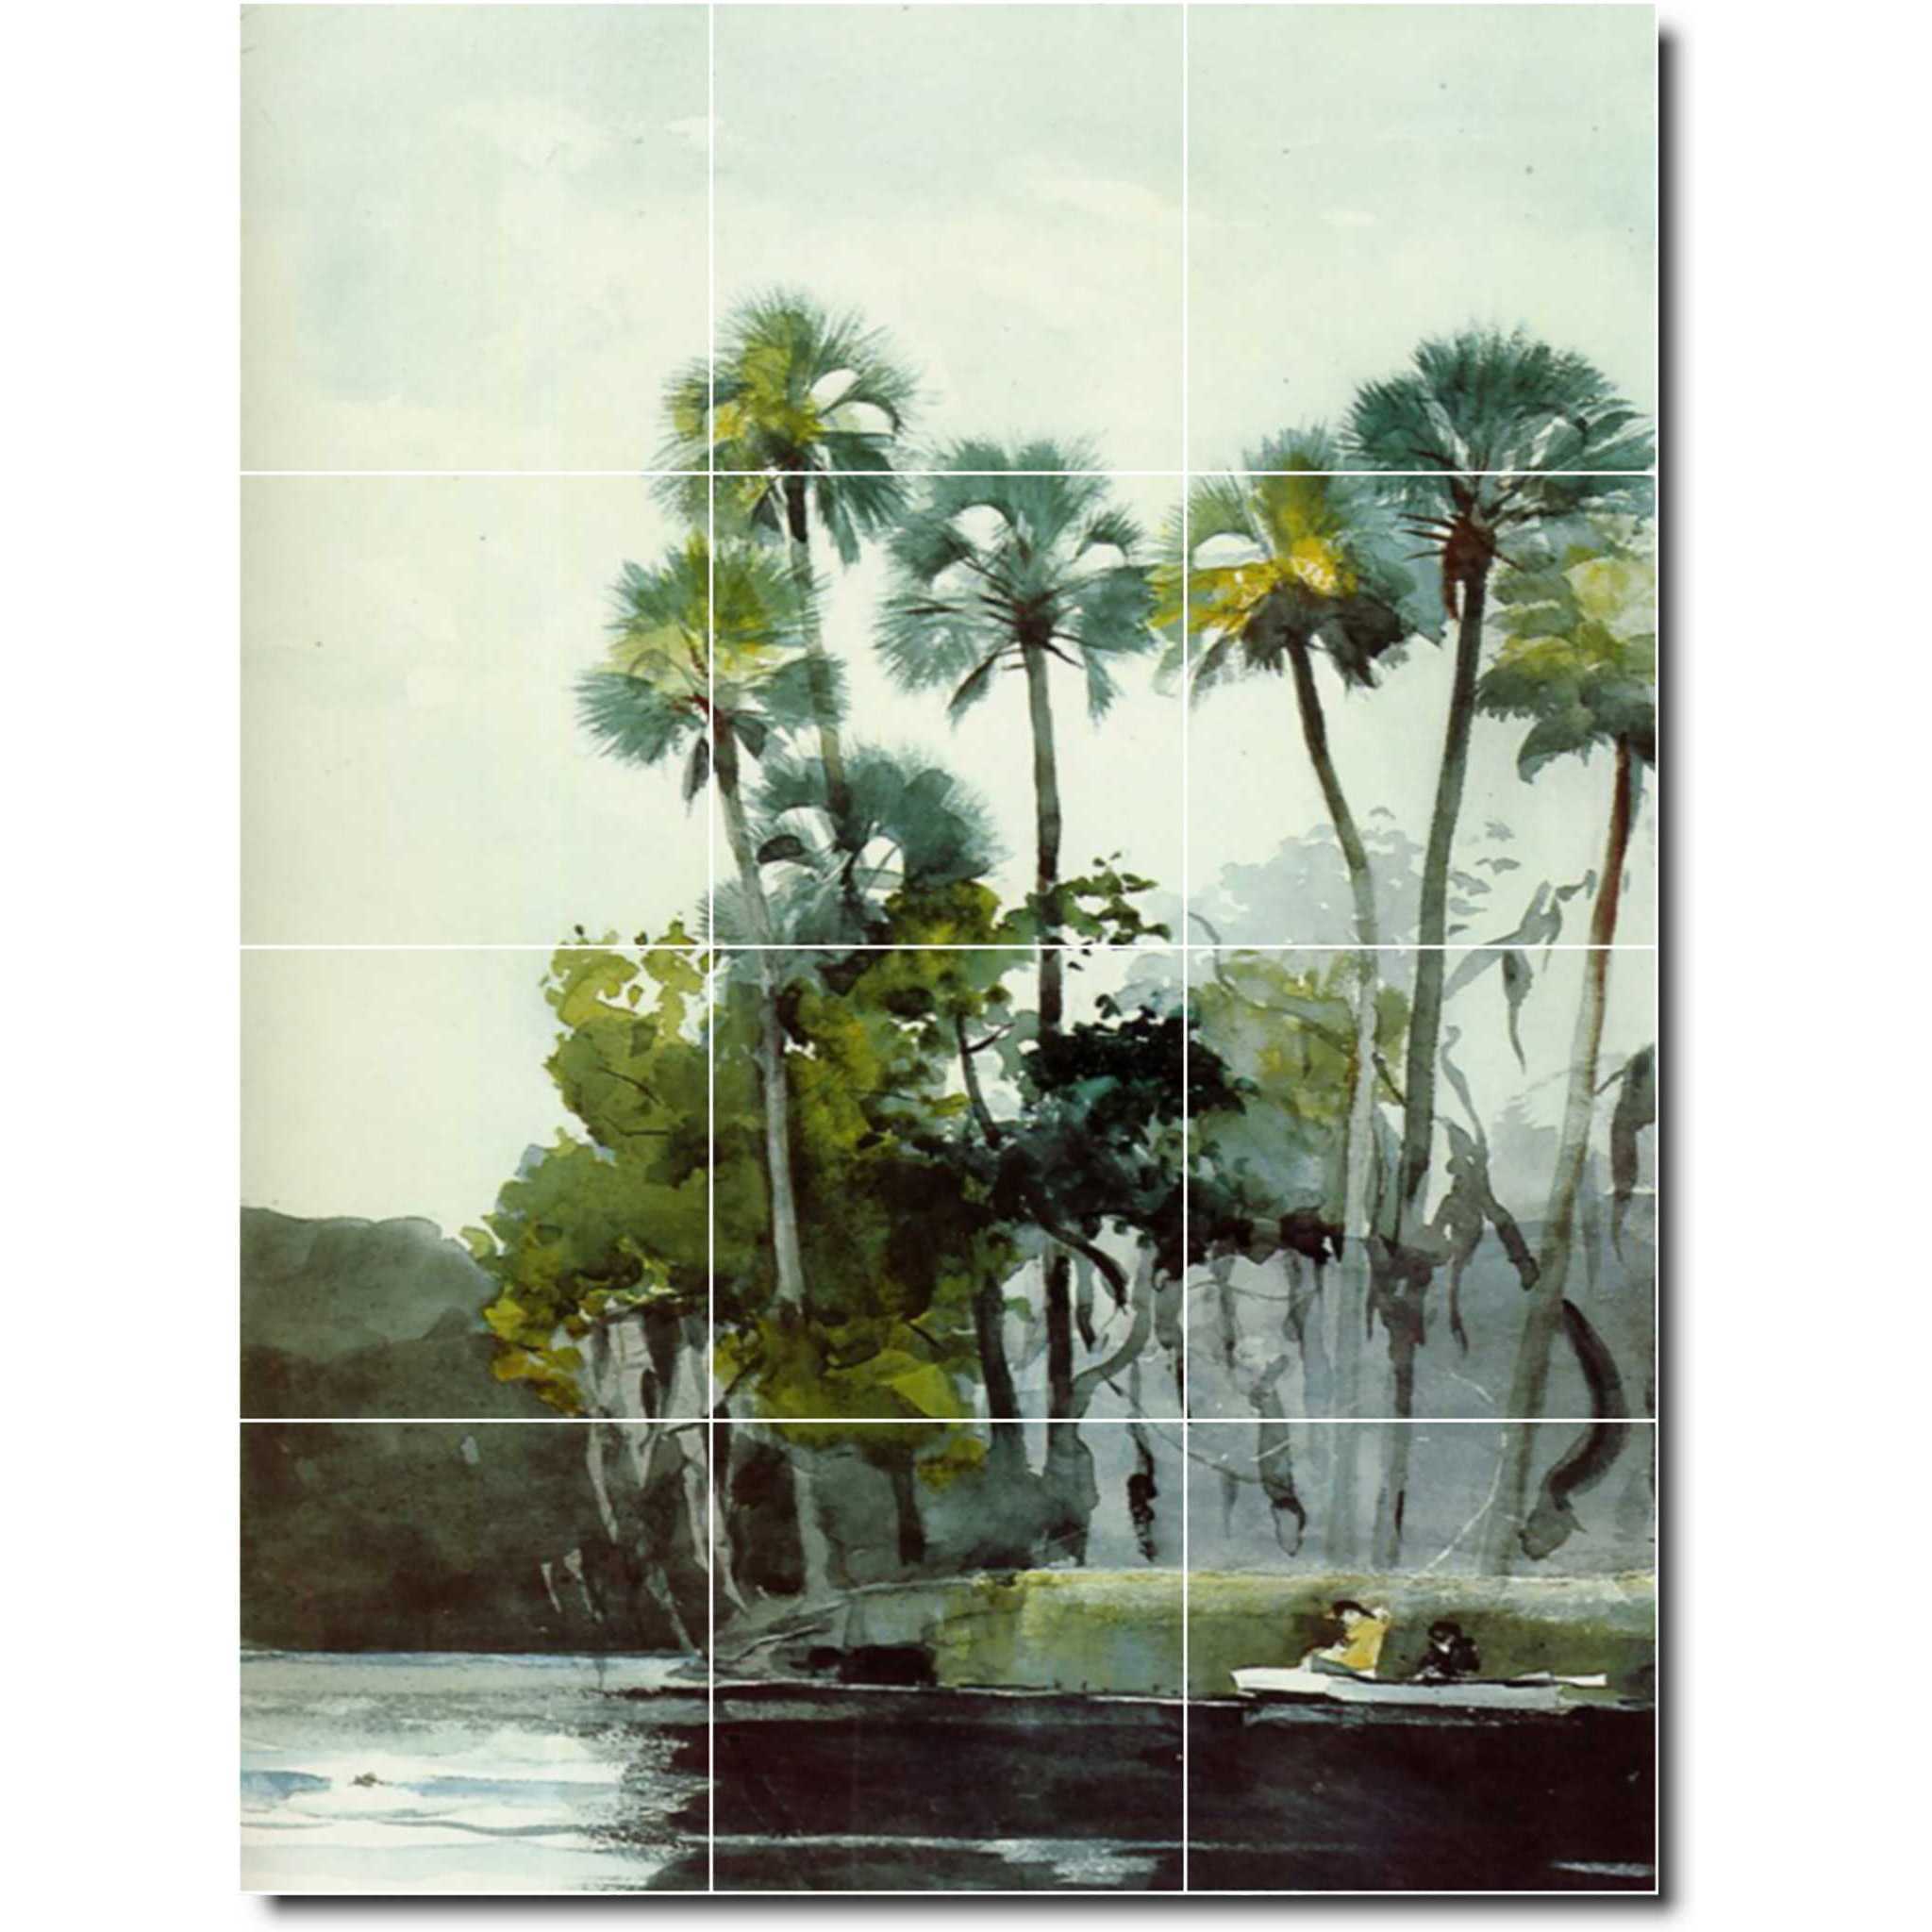 Winslow Homer Country Painting Ceramic Tile Mural P04410-XL. 36"W x 48"H (12) 12x12 tiles